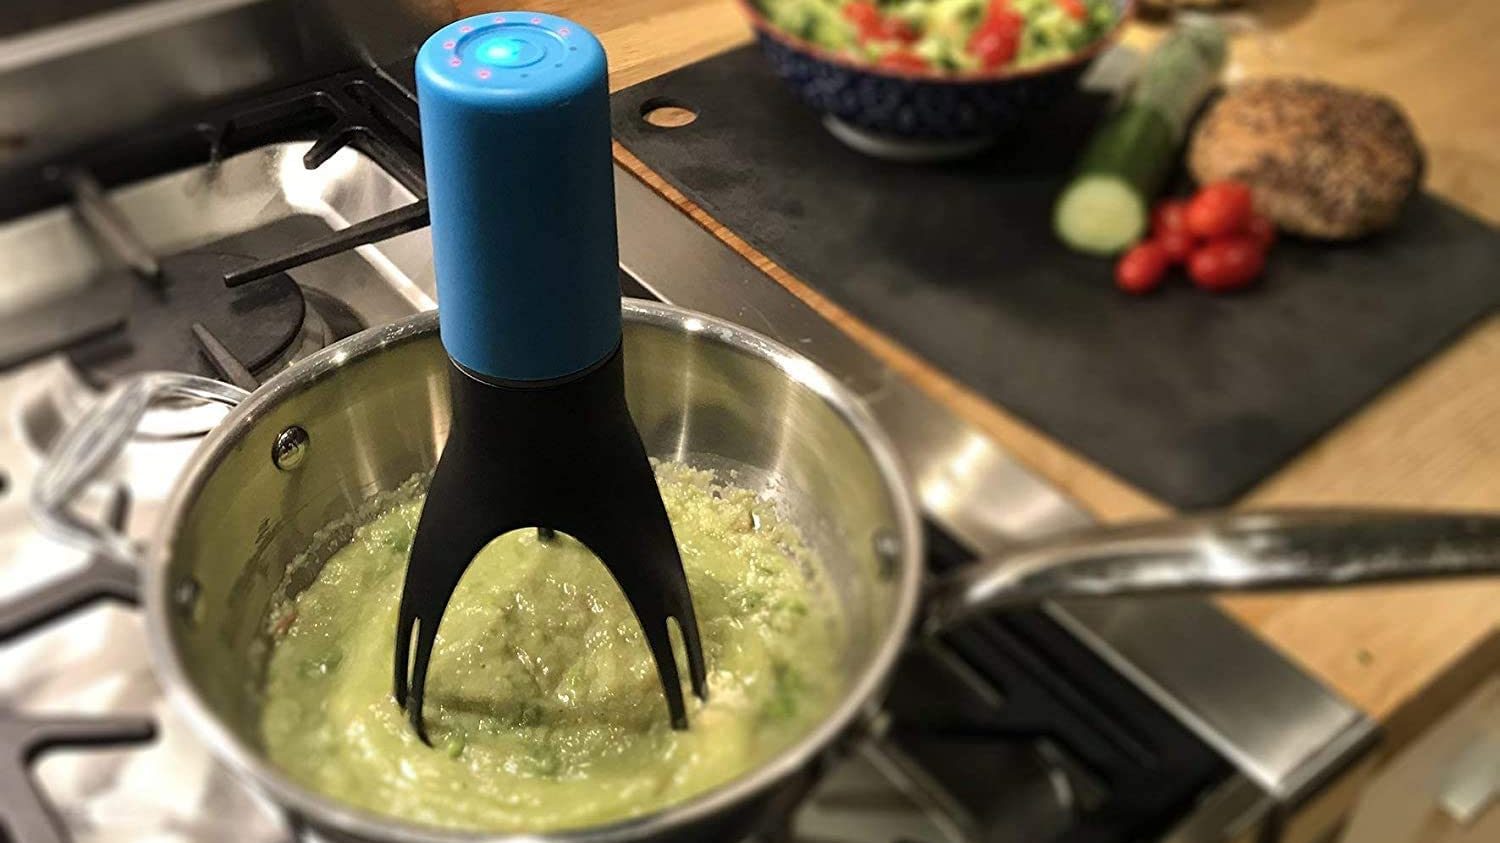 Who knew I needed an automatic stirrer? : r/DidntKnowIWantedThat